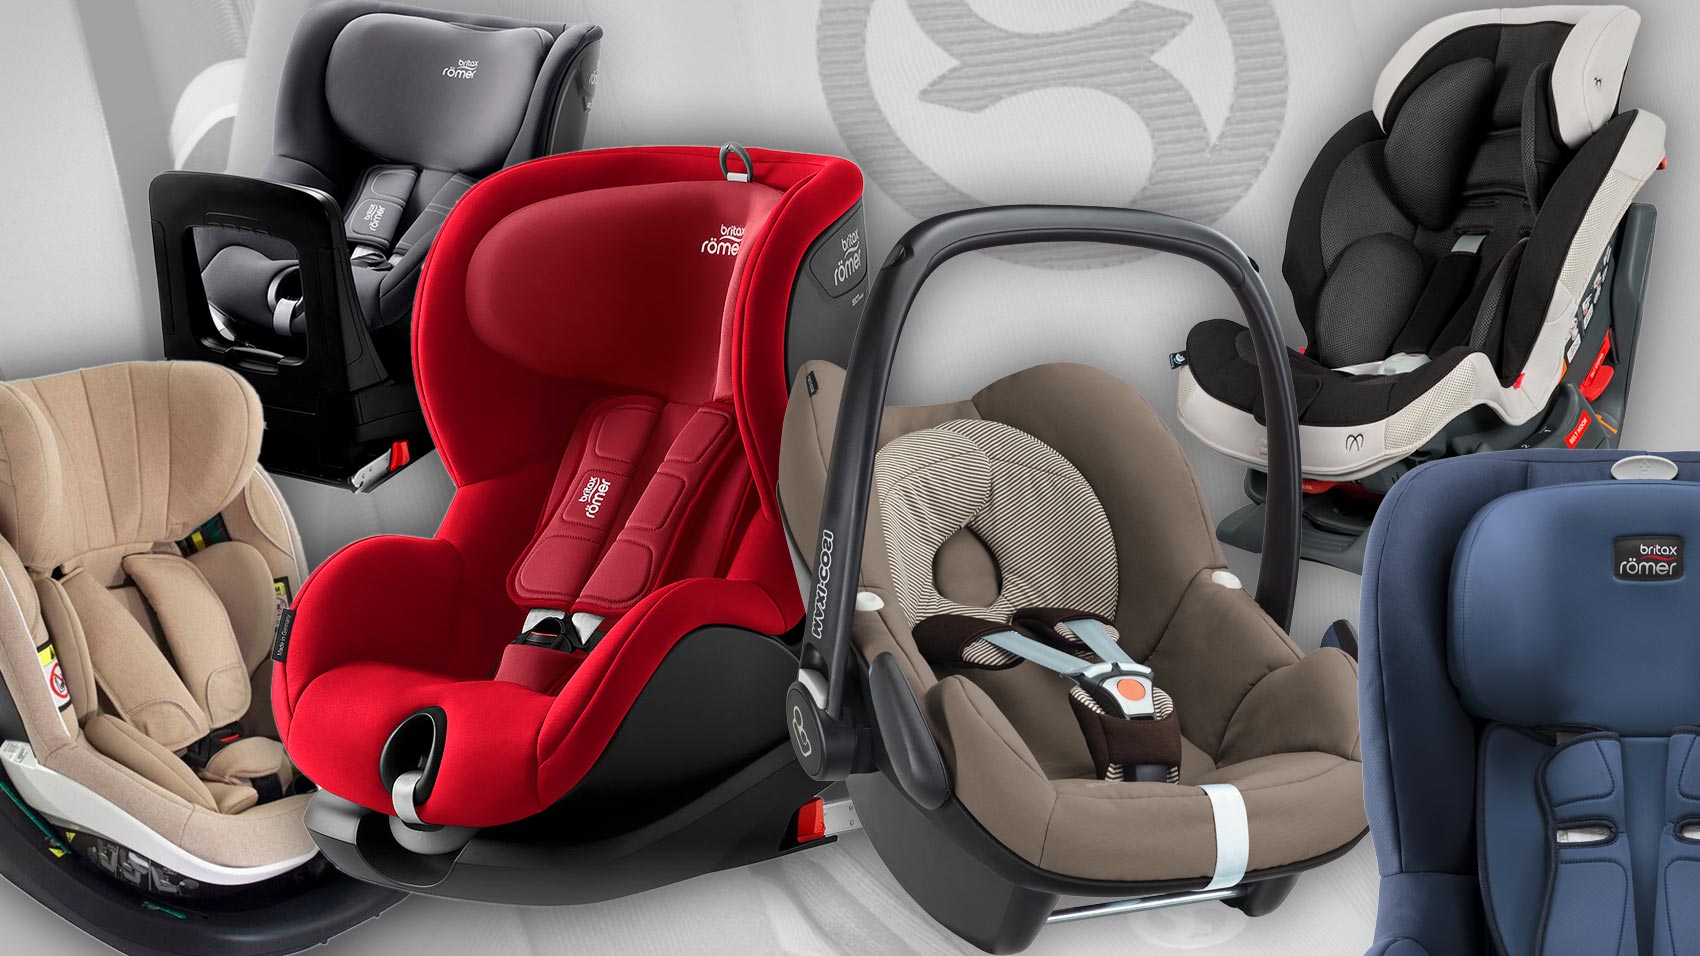 The right choice of car seat for your child